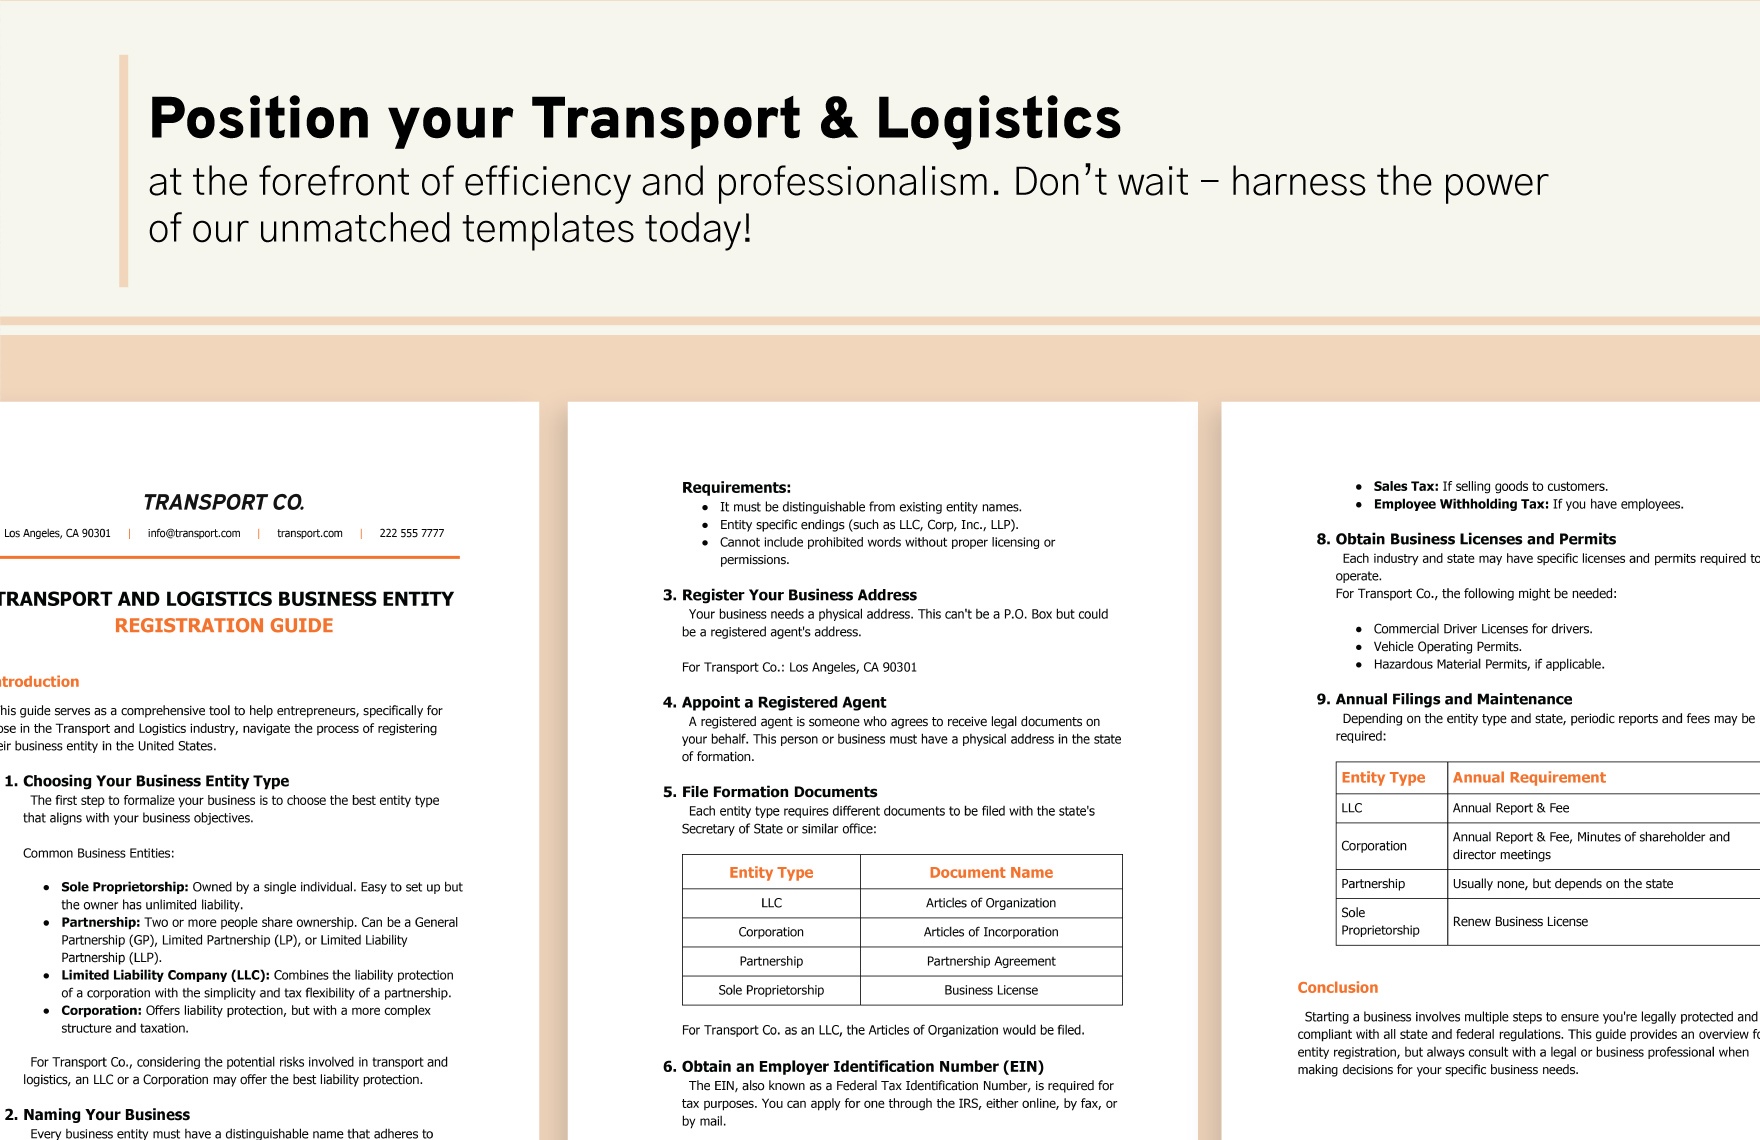 Transport and Logistics Business Entity Registration Guide Template